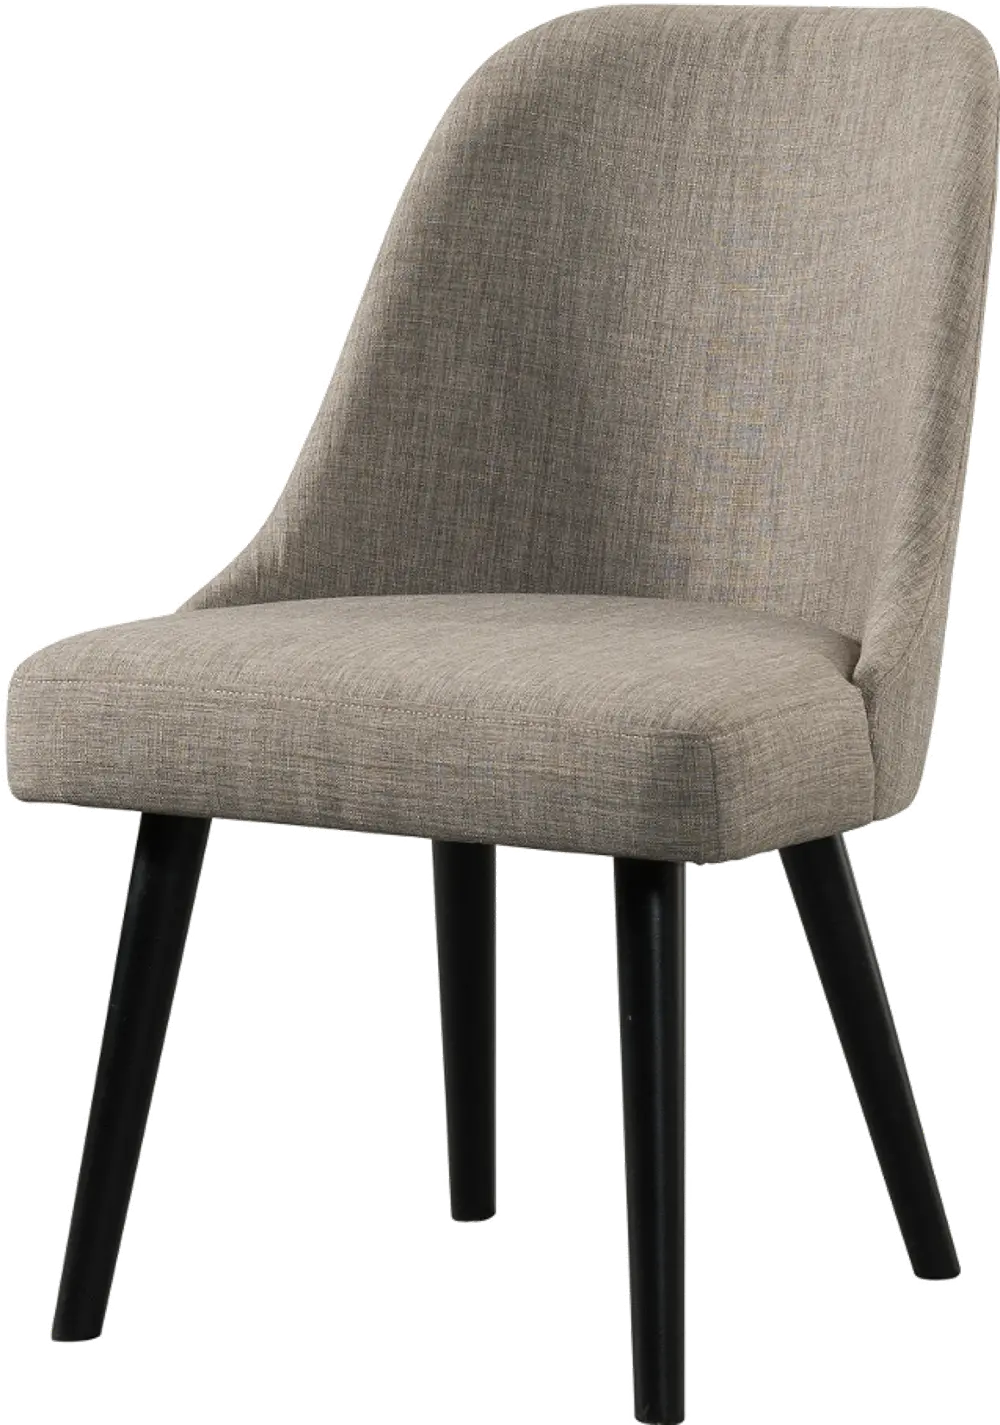 Modern Barrel Upholstered Dining Chair - Foundry-1